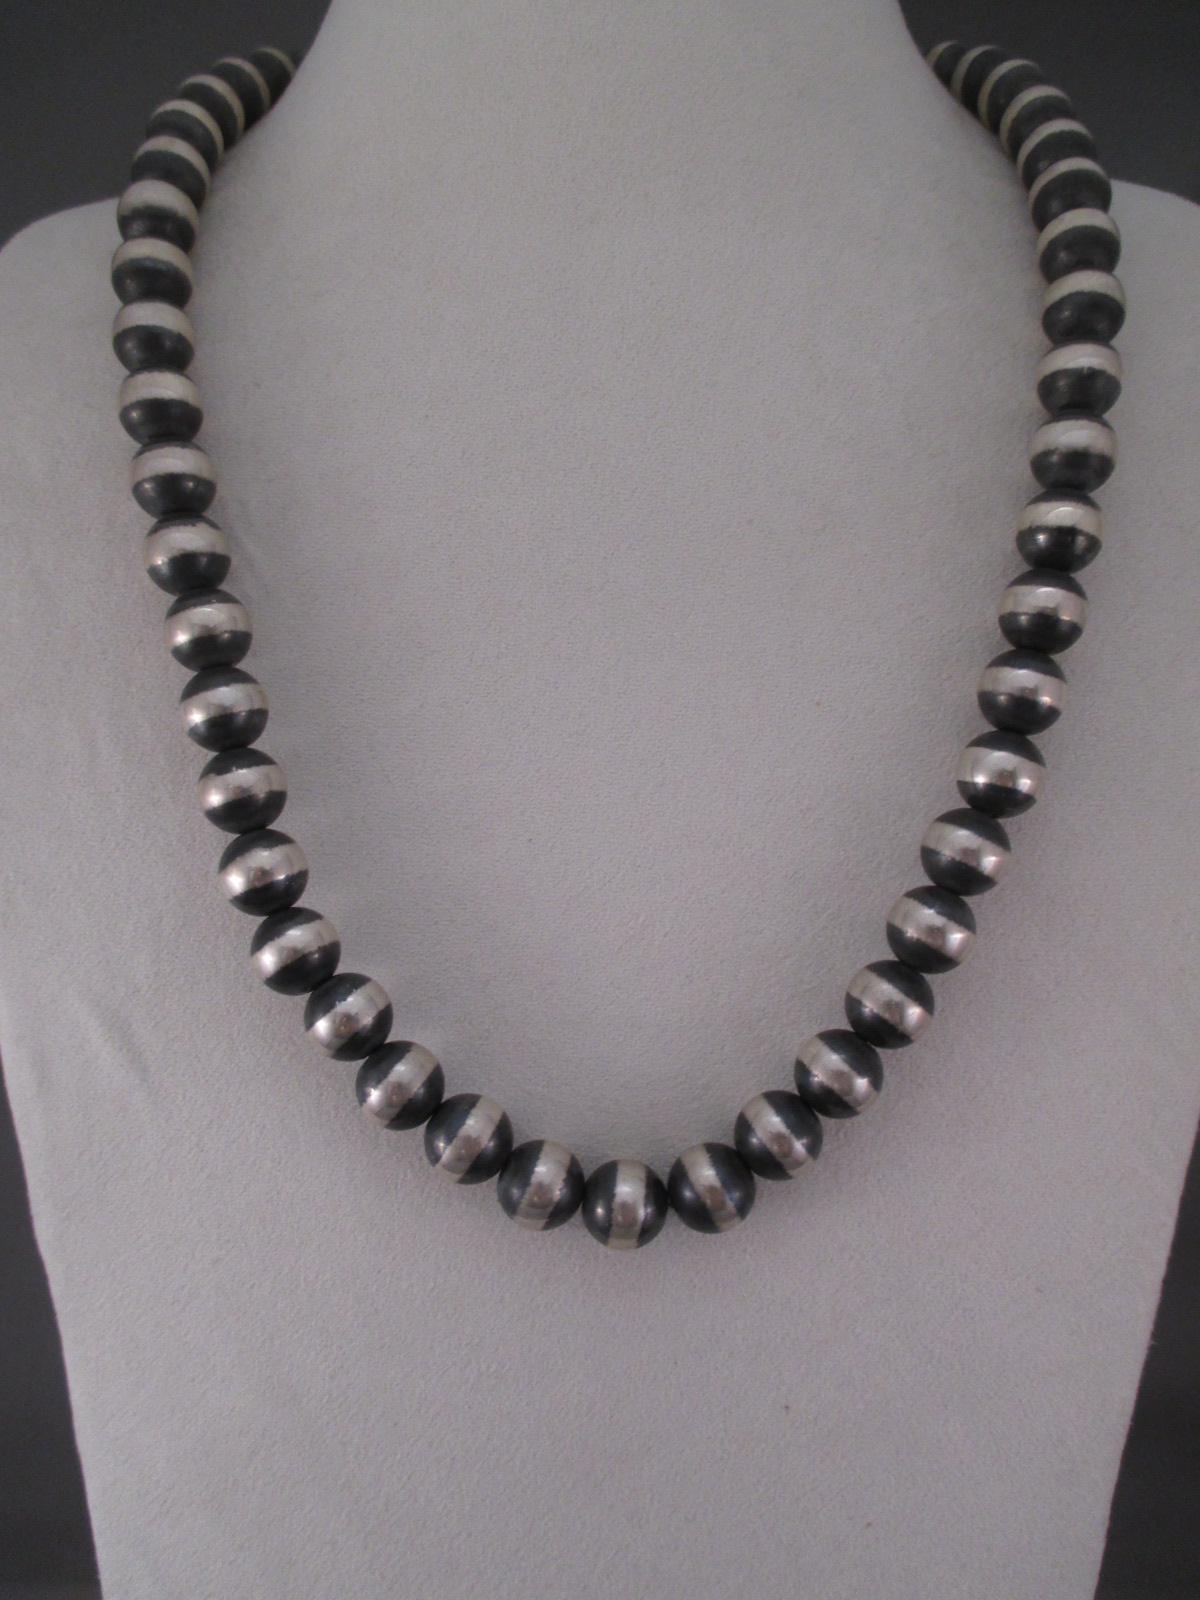 Oxidized Sterling Silver Bead Necklace (24″ long)